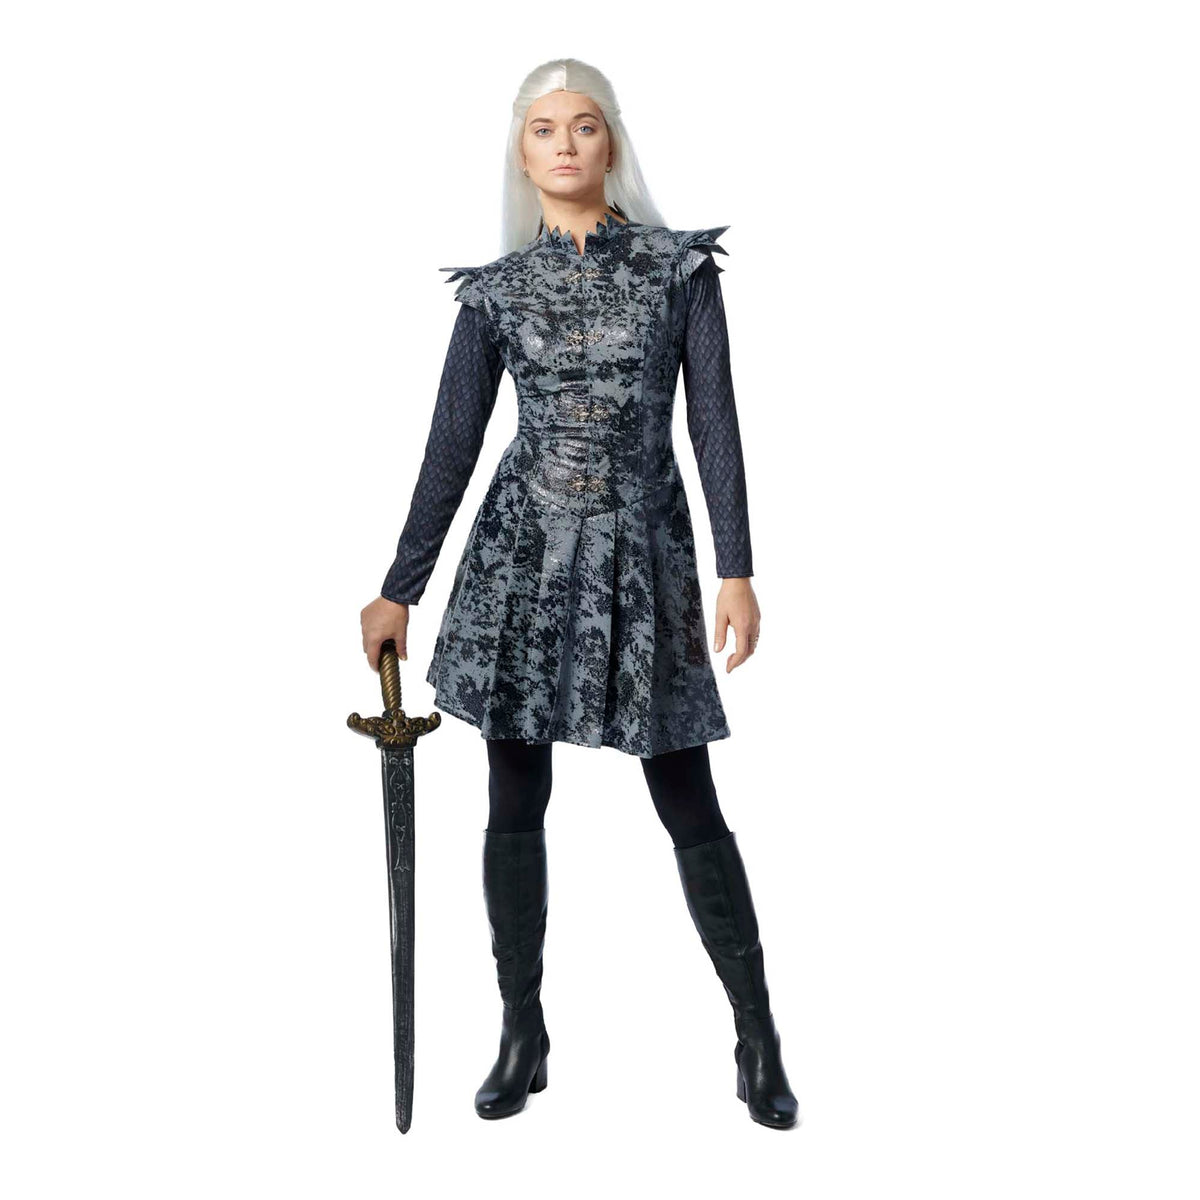 COSTUME CULTURE BY FRANCO Costumes Dragon Rider Costume for Adults, Grey Dress